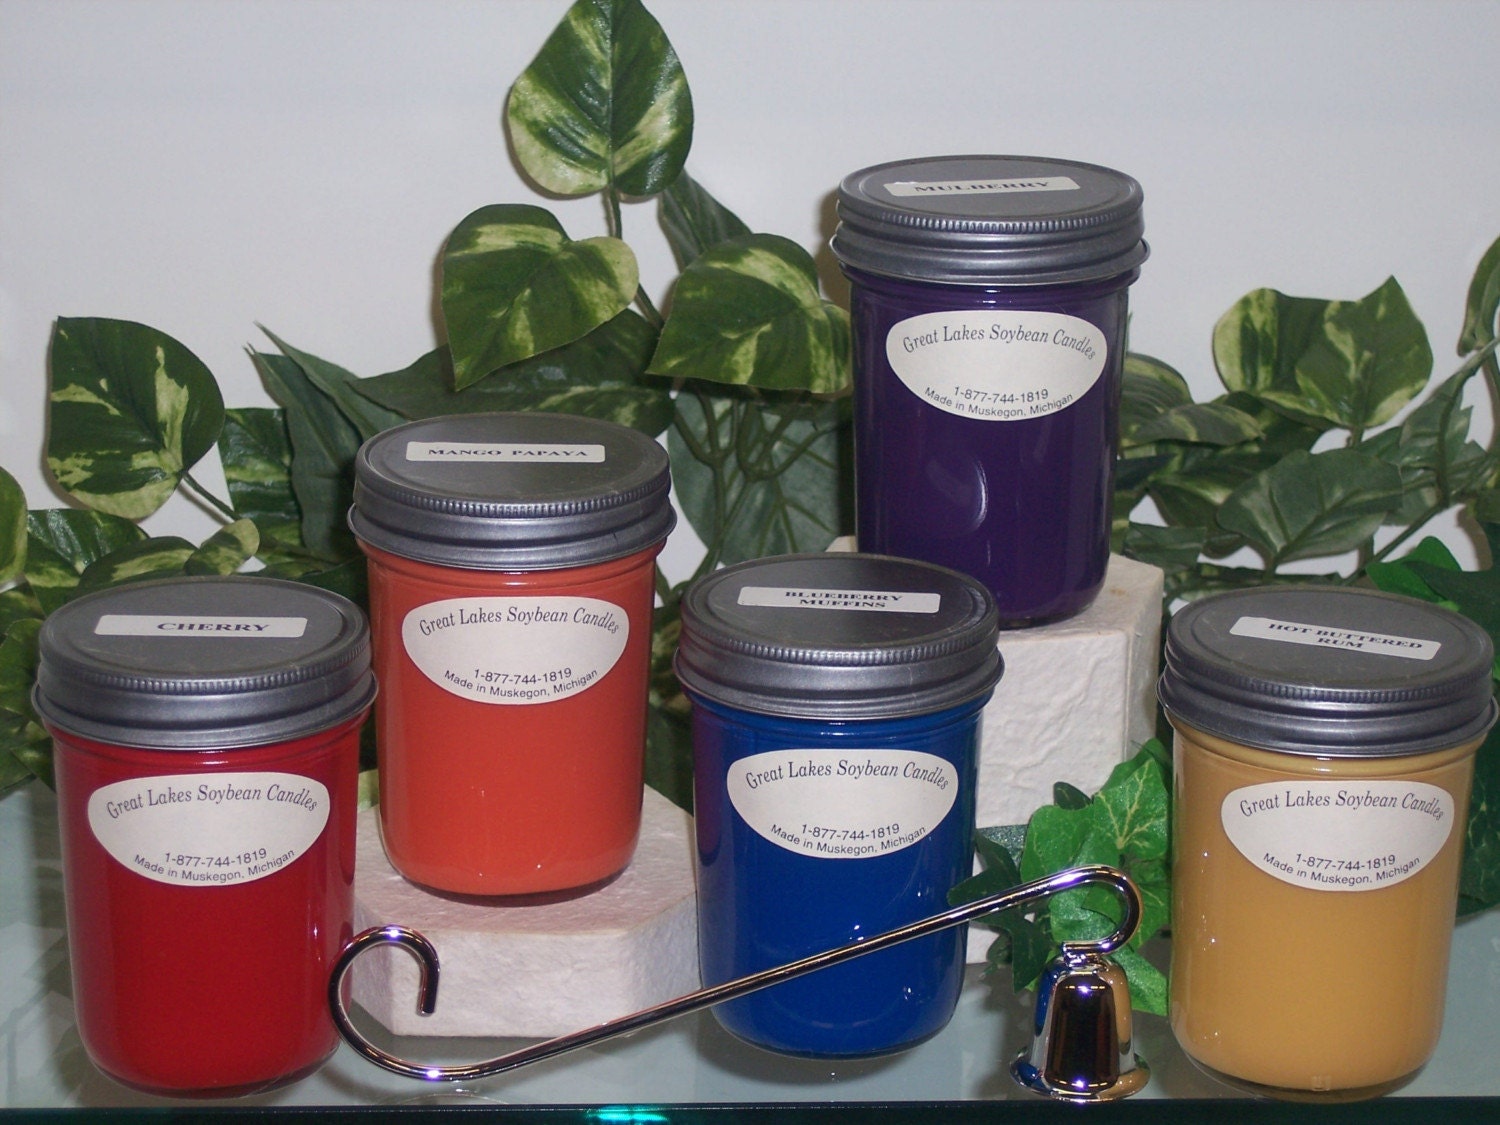 GREAT LAKES SOYBEAN CANDLES 12 JARS FOR 50 DOLLARS SHIPPING FLAT RATE  15 DOLLARS ANY SCENT